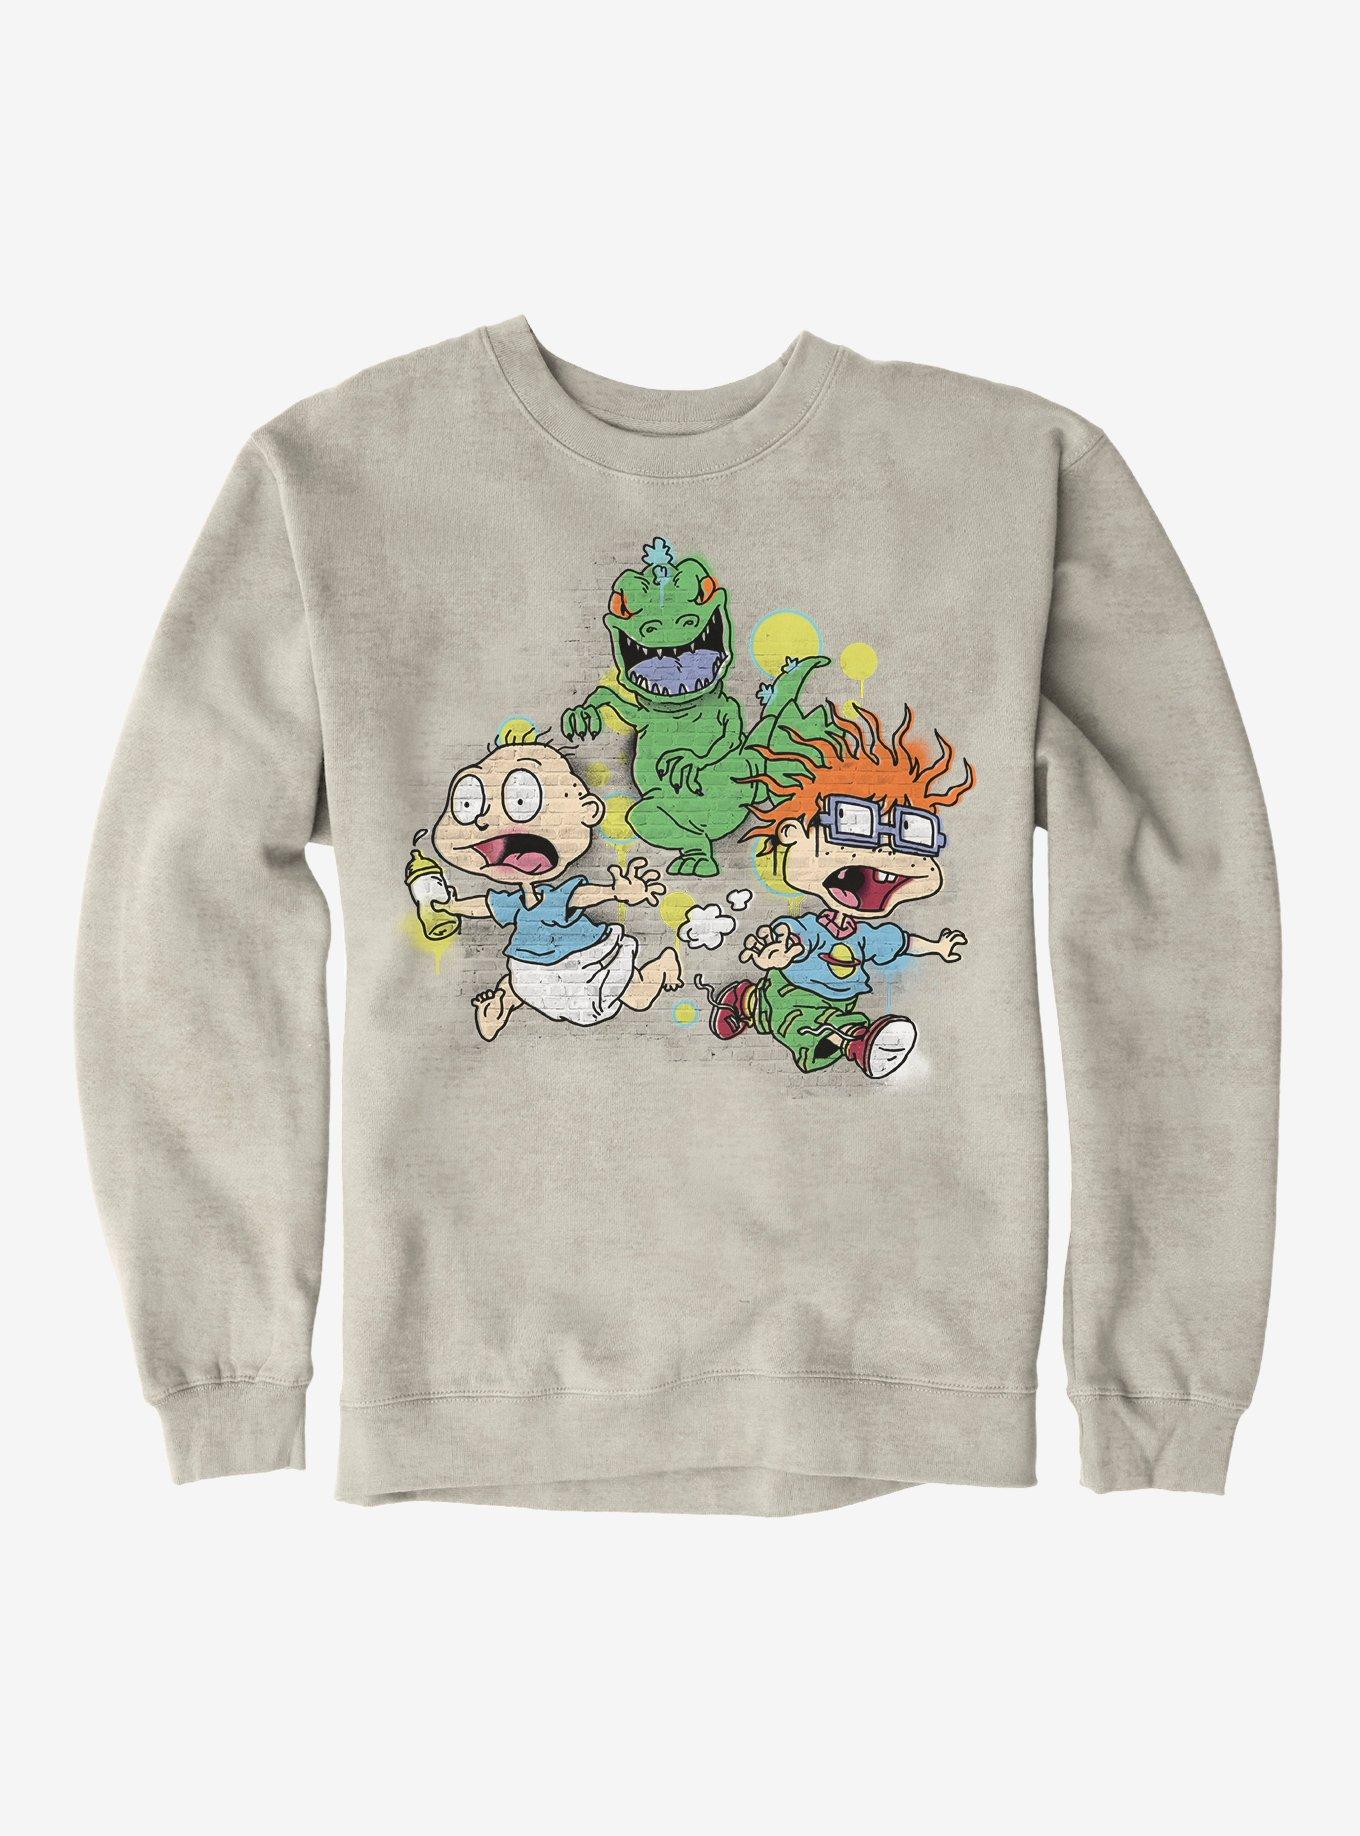 Rugrats Tommy And Chuckie Run From Reptar Sweatshirt, , hi-res